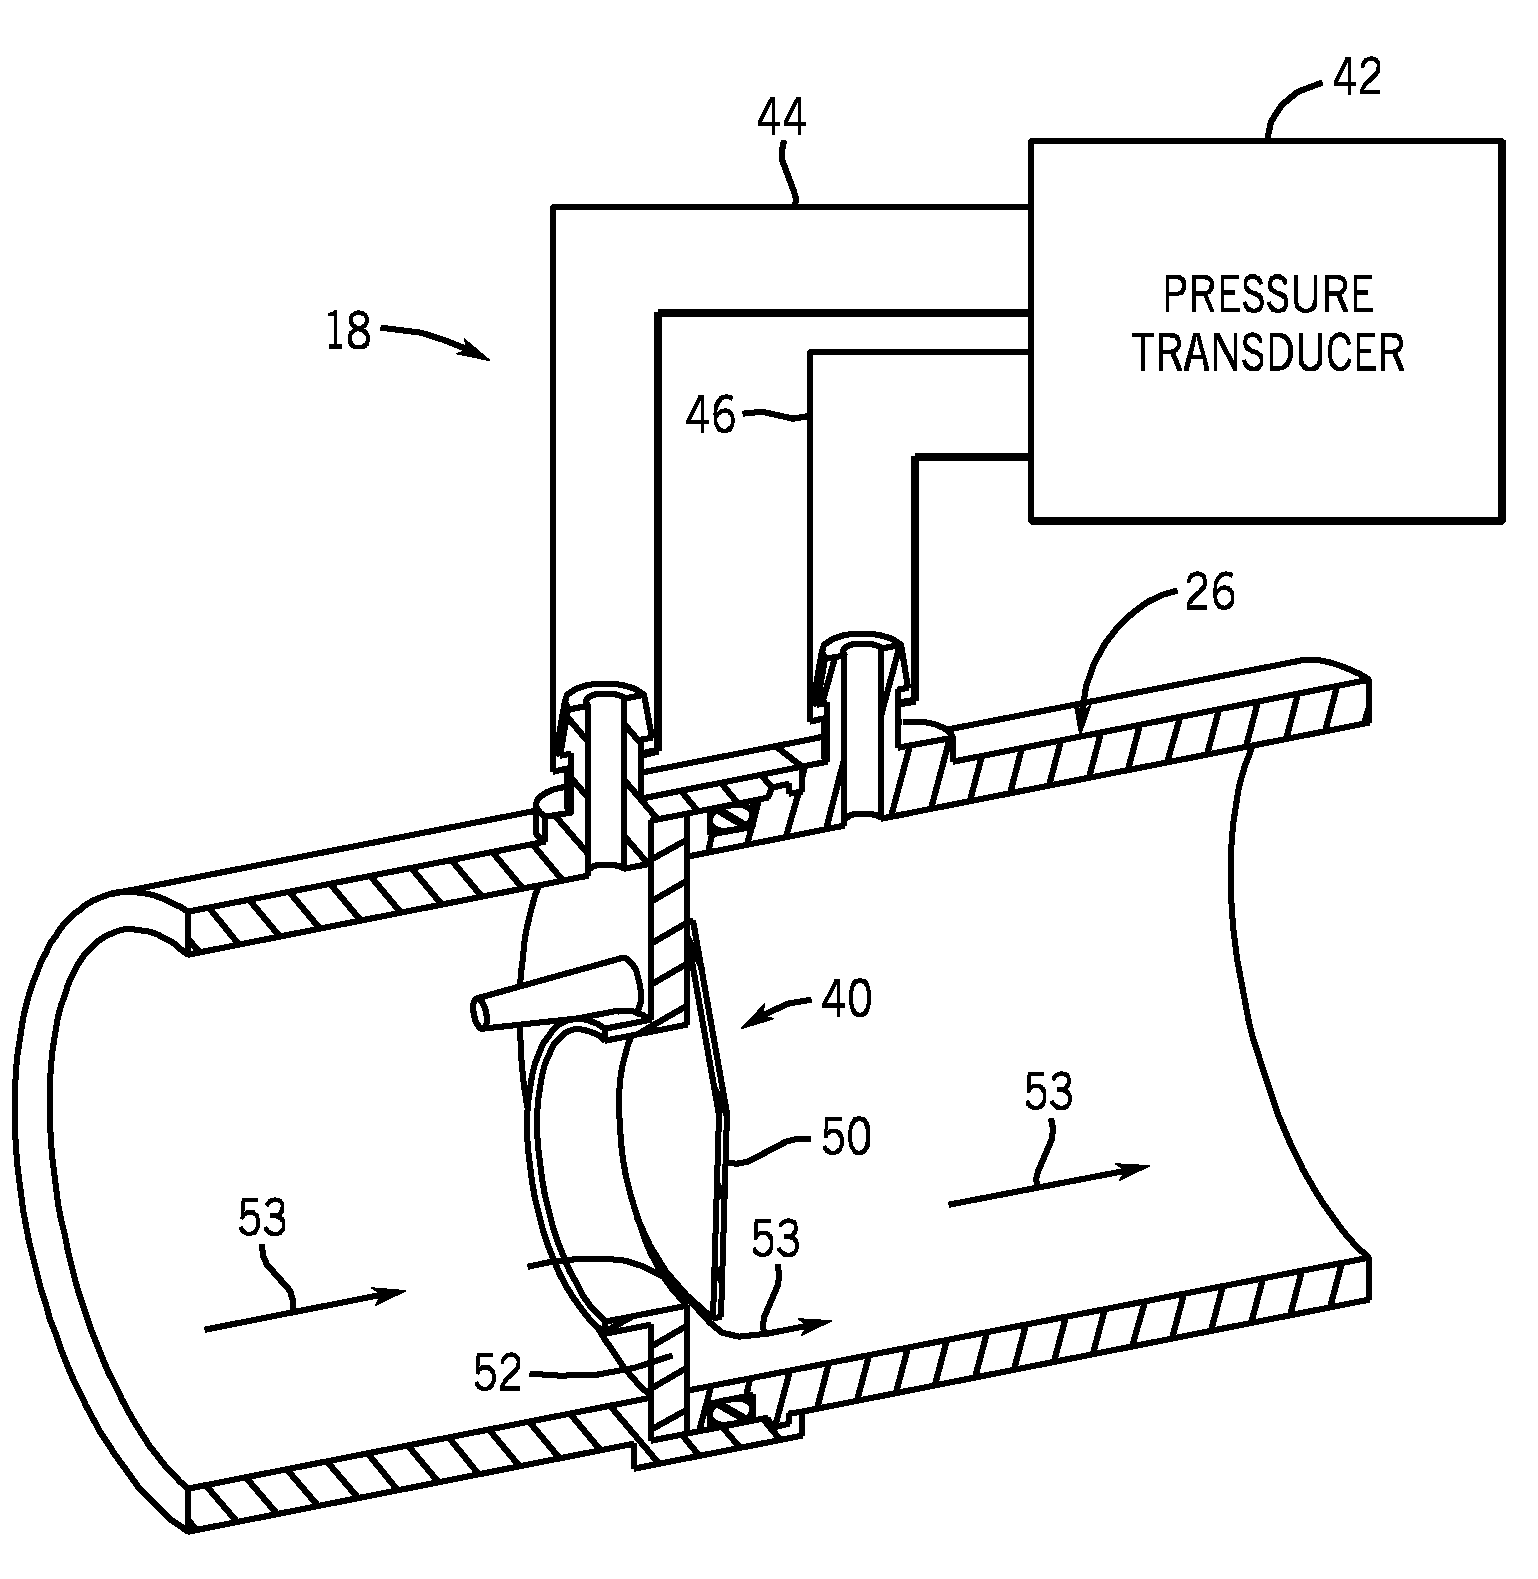 System and method for a flow sensor